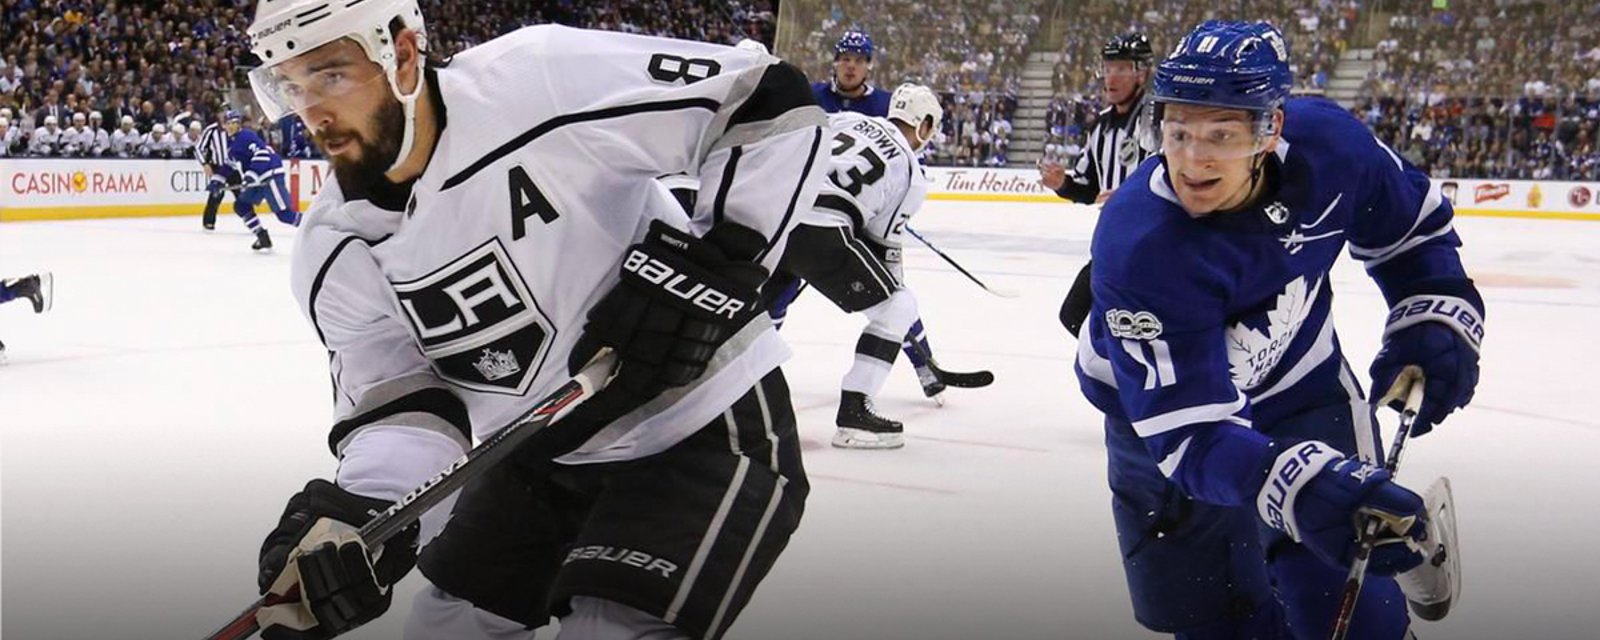 Drew Doughty chirps Leafs, comes to Phaneuf's defense